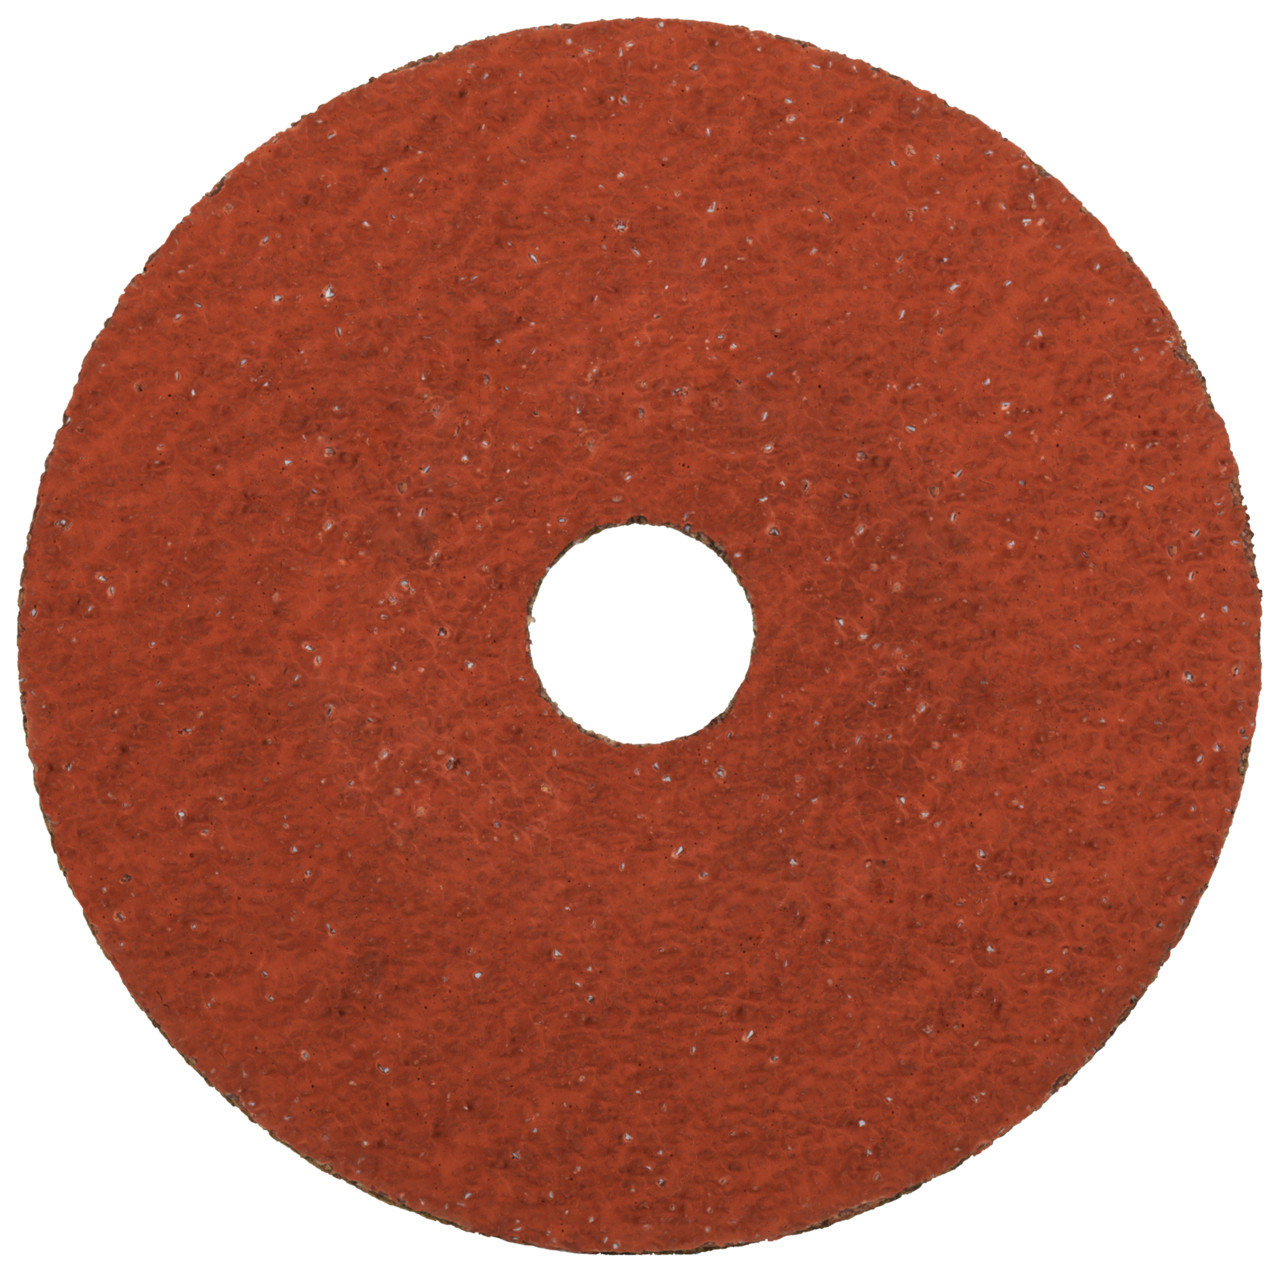 Tyrolit CA-PA93 N NATURAL FIBRE DISC DxH 180x22 For steel and stainless steel, P36, form: DISC, Art. 712269